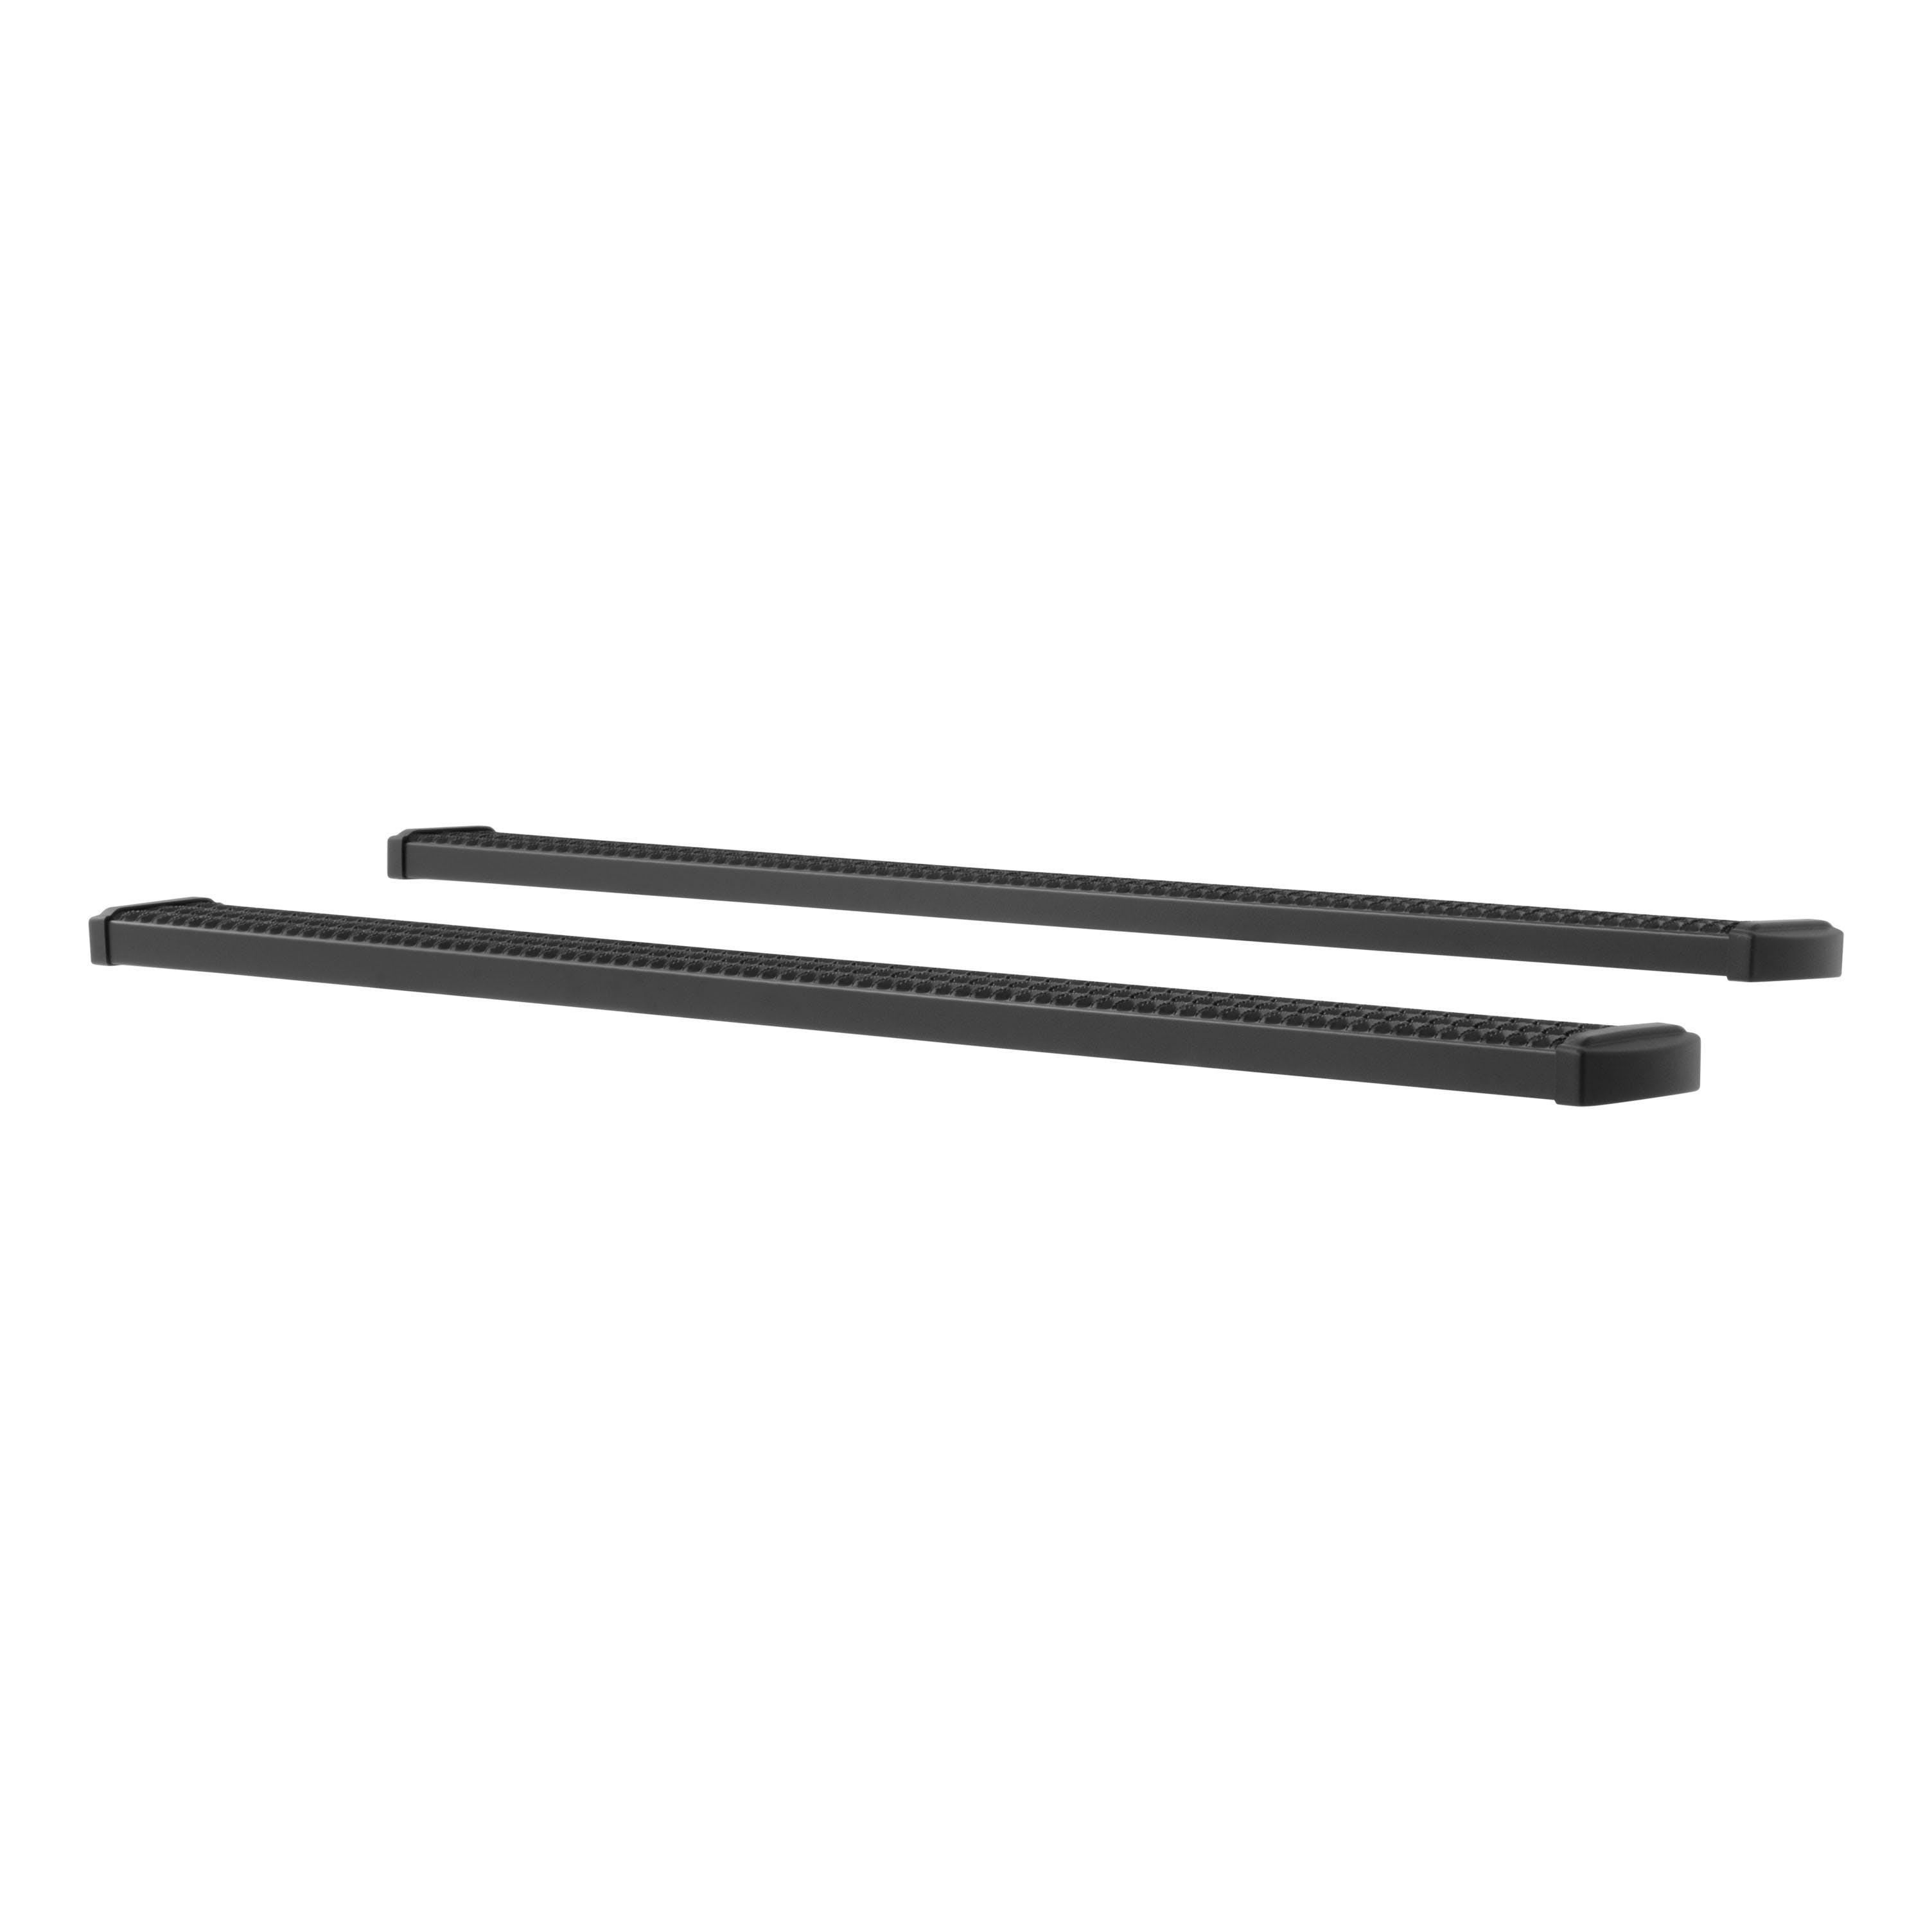 LUVERNE 415088-401447 Grip Step 7 inch Running Boards